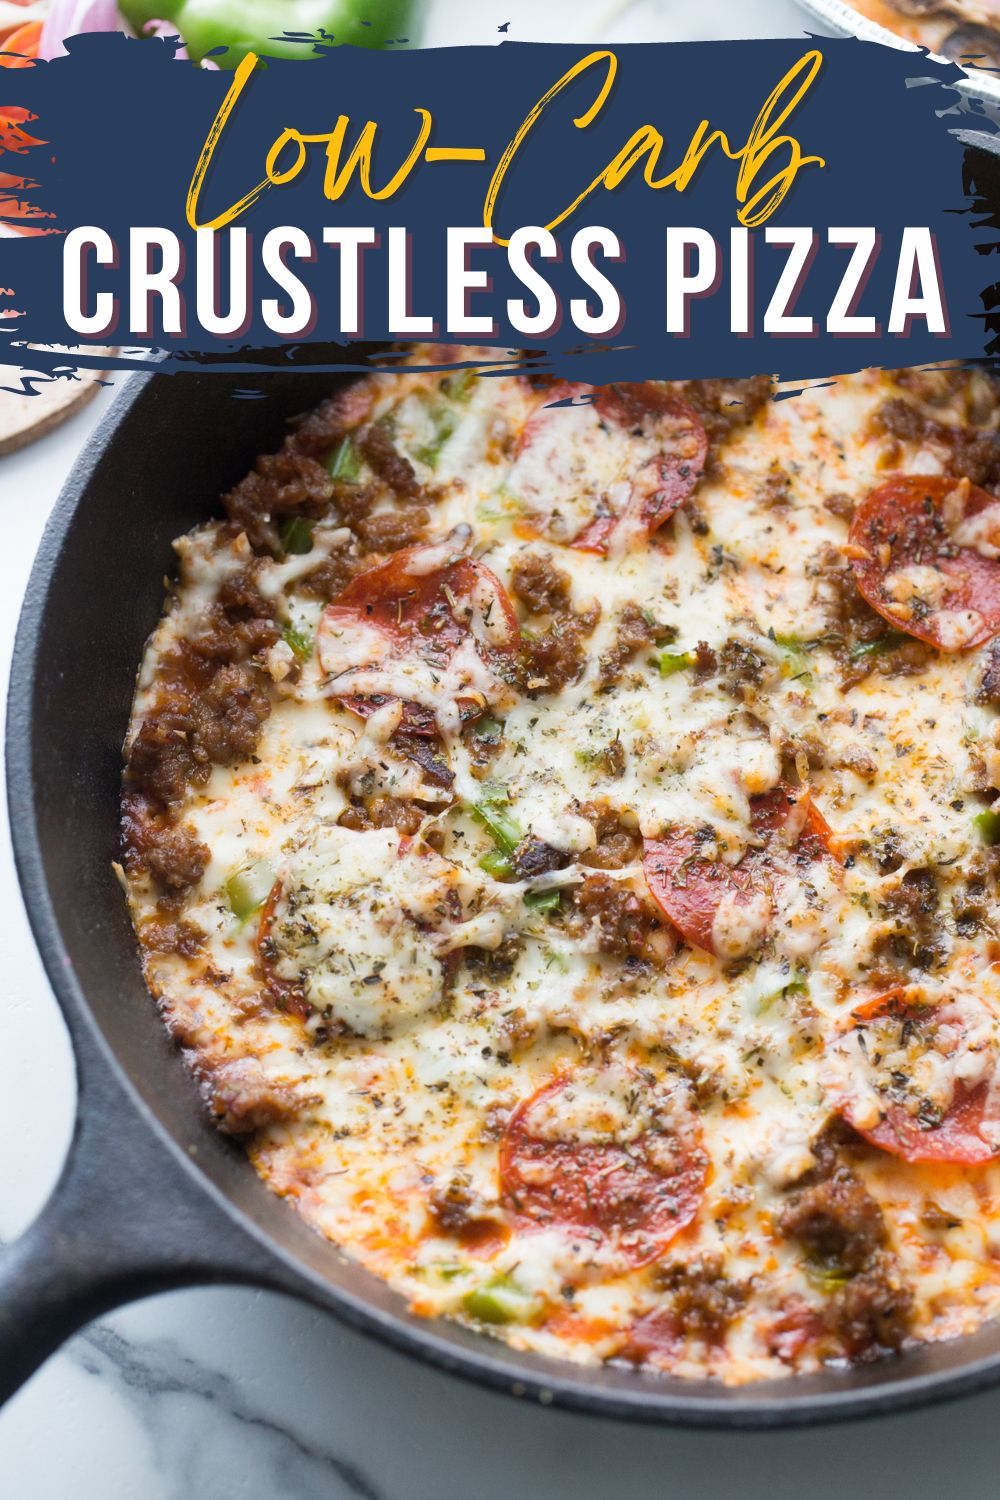 Crustless Pizza in a cast iron skillet on a marble background with test on the image